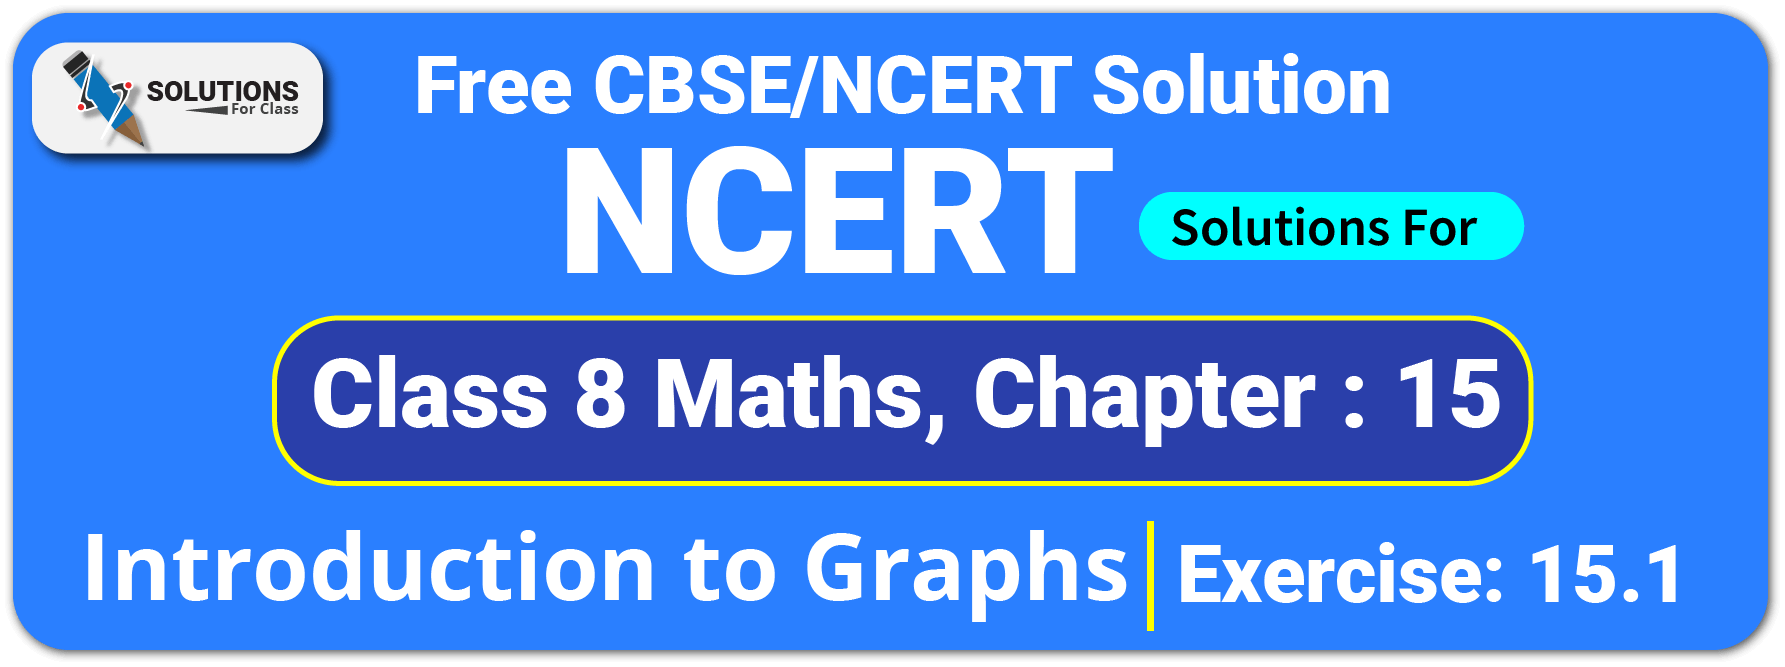 NCERT Solutions For Class 8 Chapter 15, Introduction to Graphs, Exercise15.1